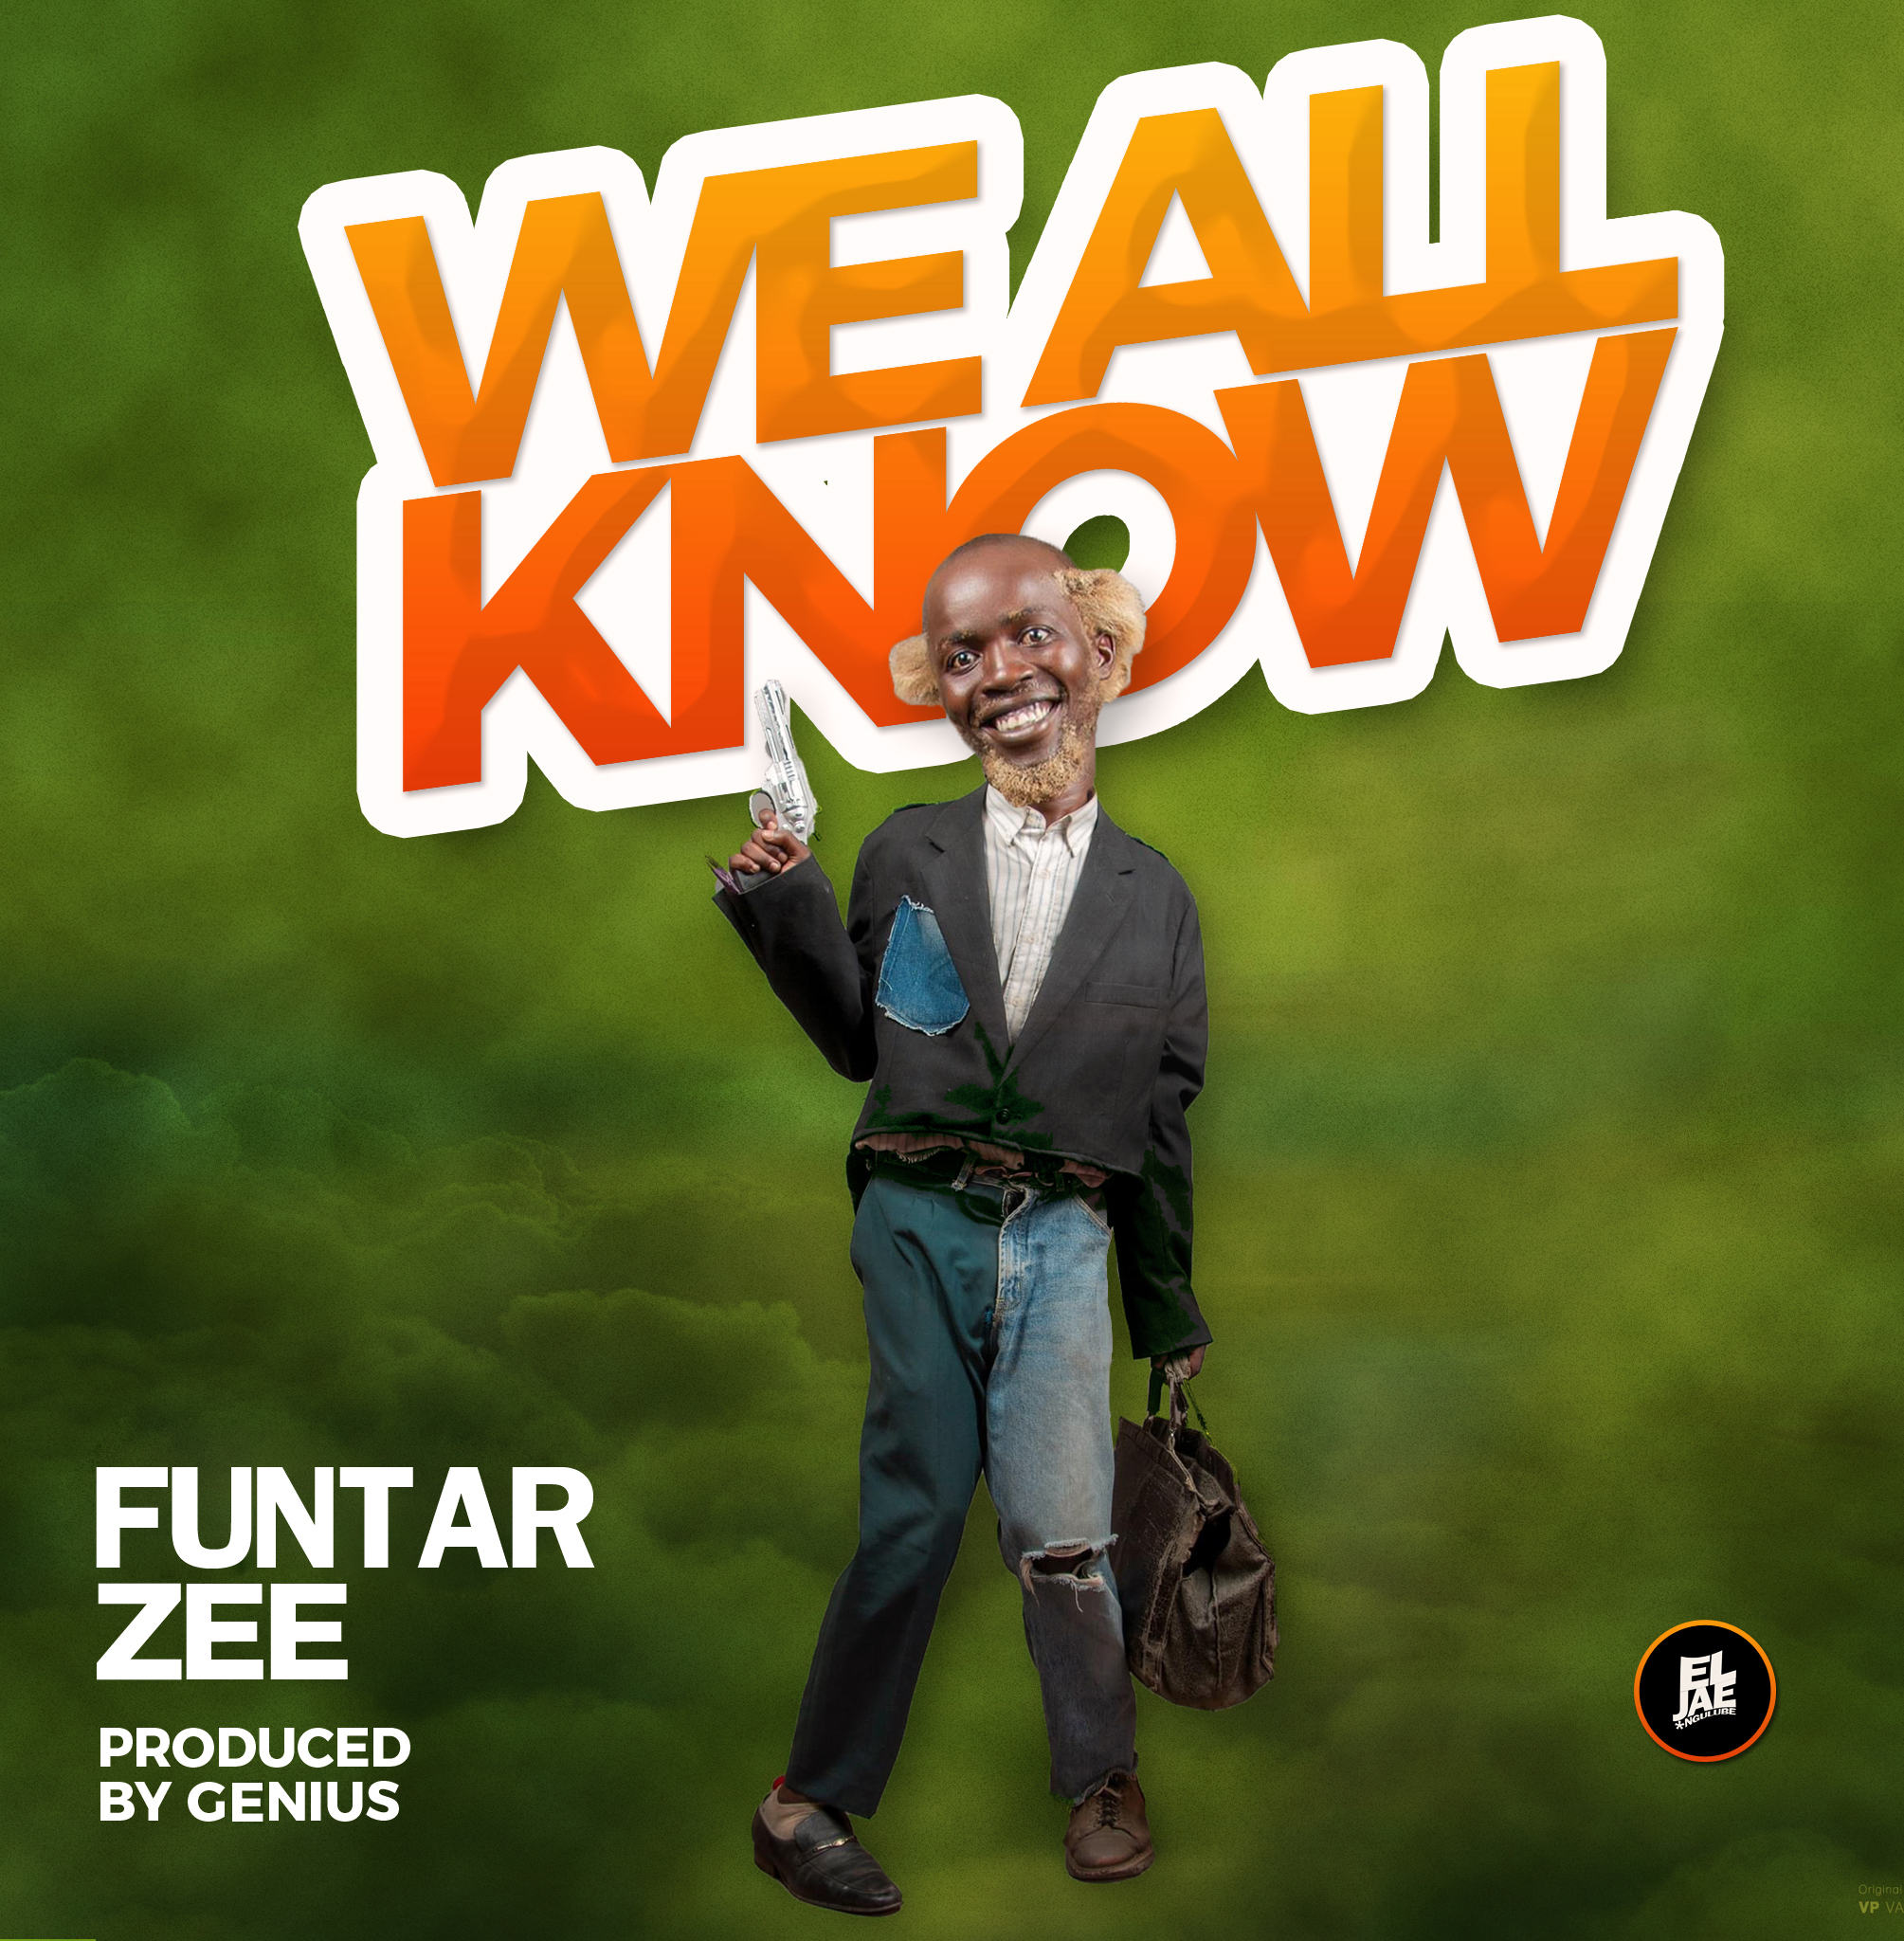 Funtarzee - "We All Know" Mp3